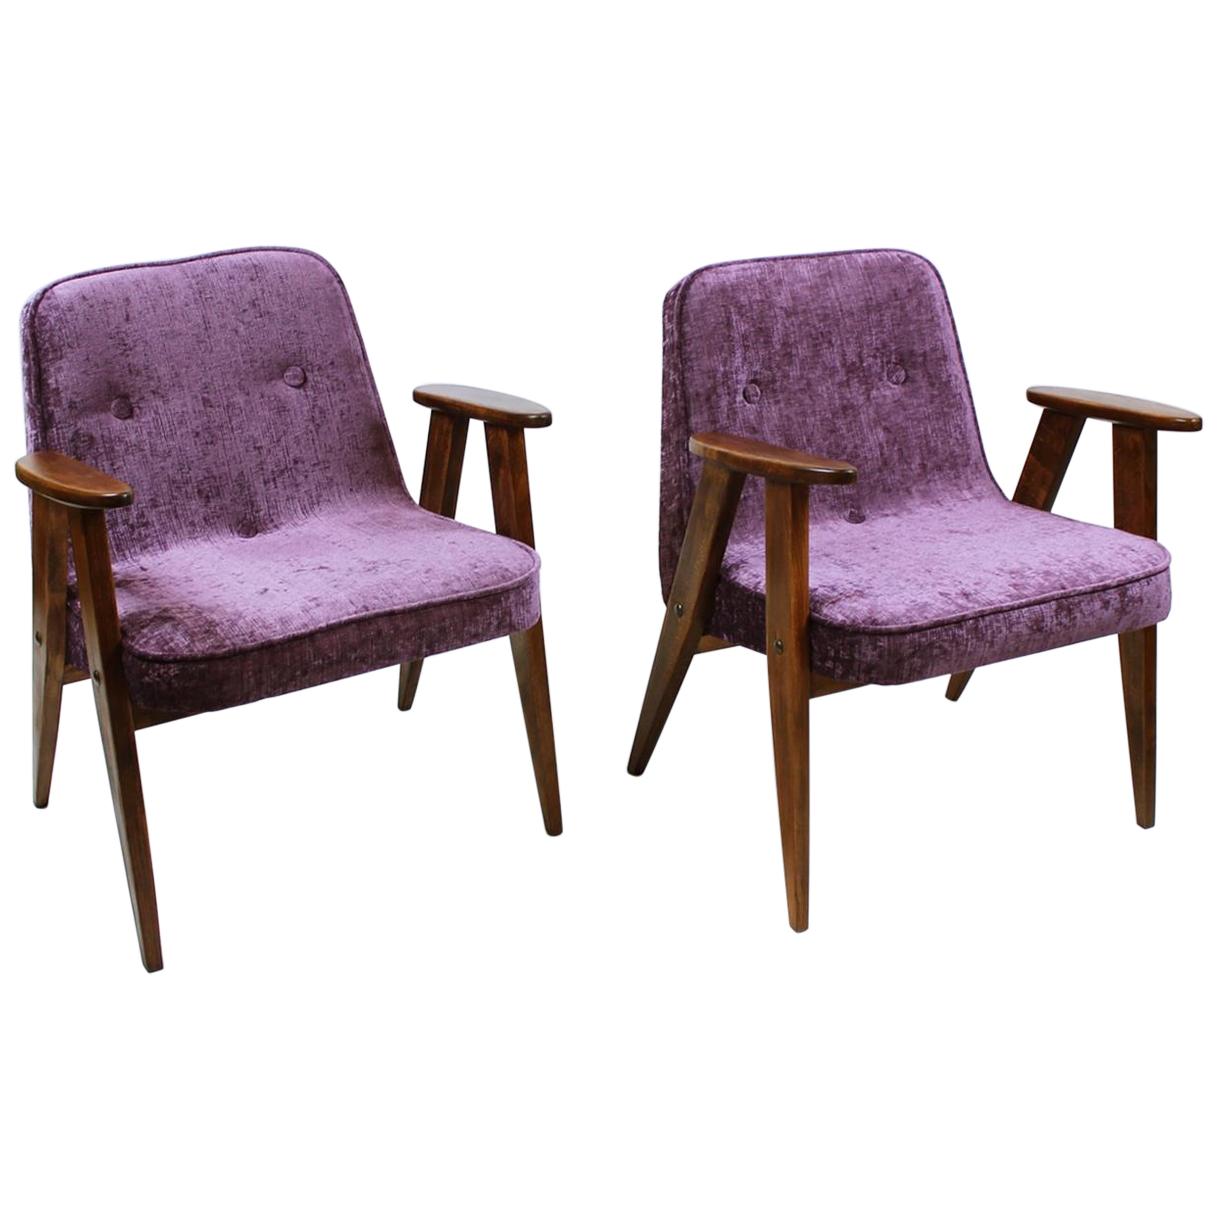 Pair of Midcentury 366 Armchairs by Jozef Chierowski 1960 Poland For Sale